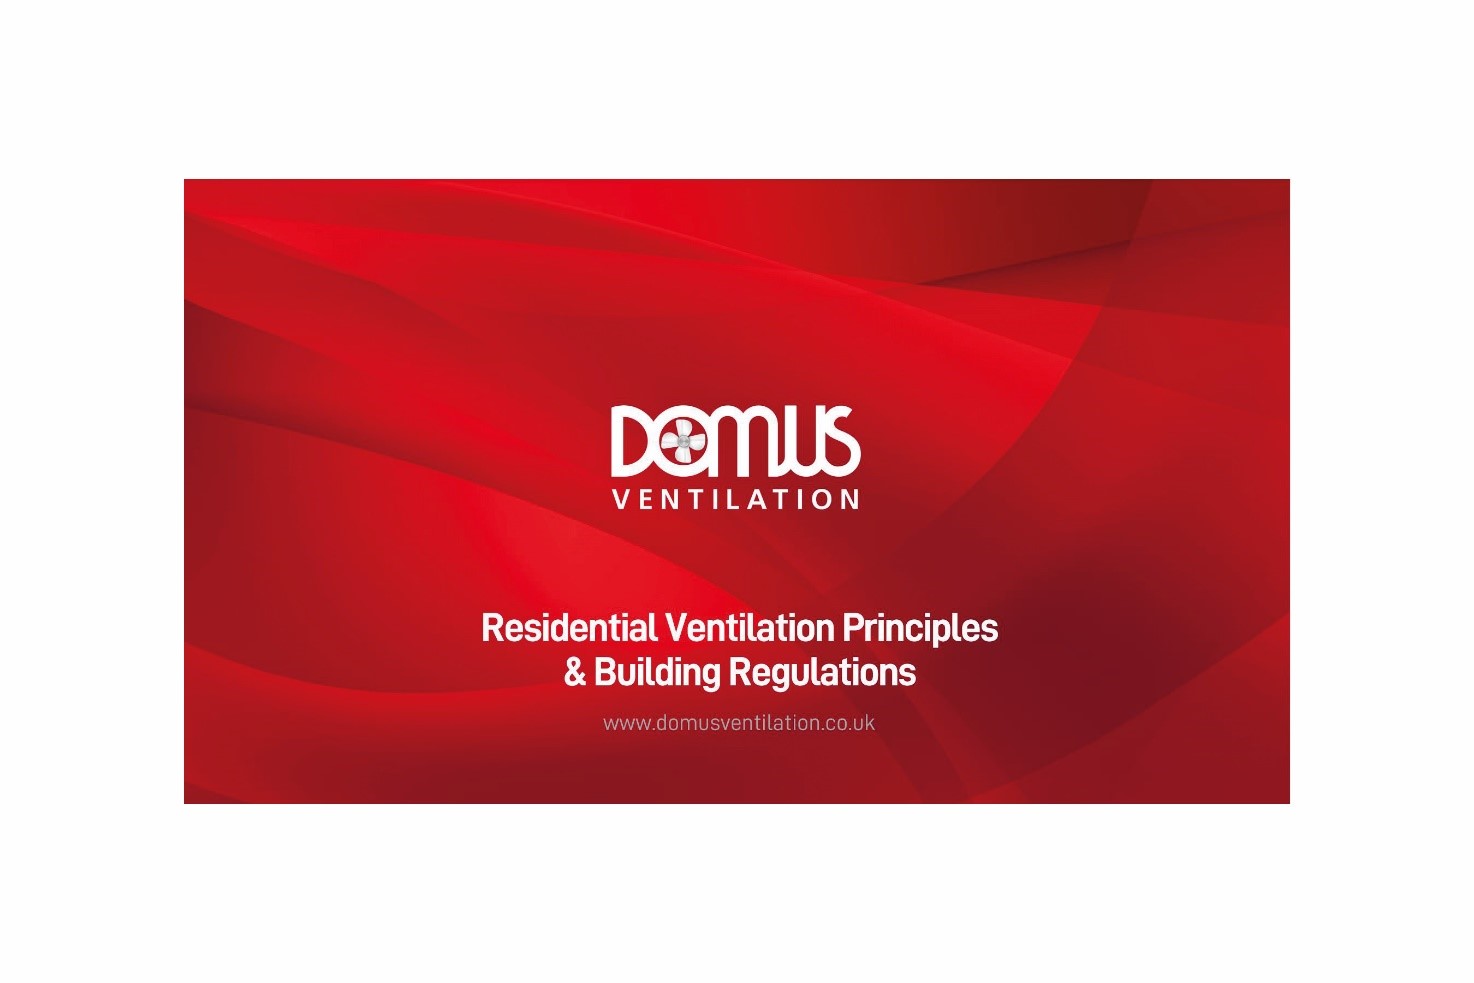 DOMUS VENTILATION’S LATEST CPD COURSE COVERS IMPORTANT CHANGES TO RESIDENTIAL VENTILATION @DomusVent